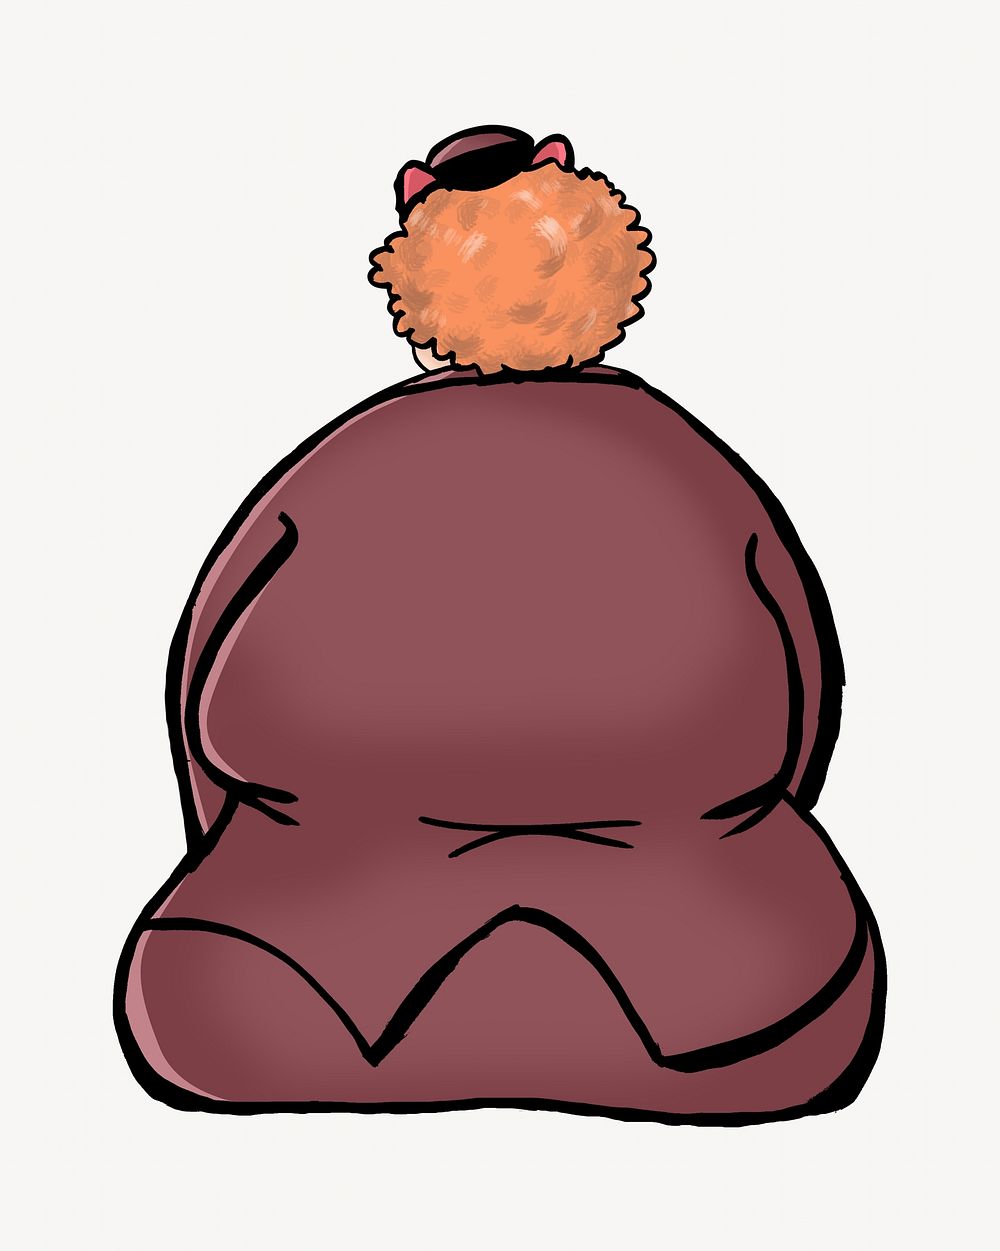 Vintage plus size woman sitting rear view character illustration. Remixed by rawpixel. 